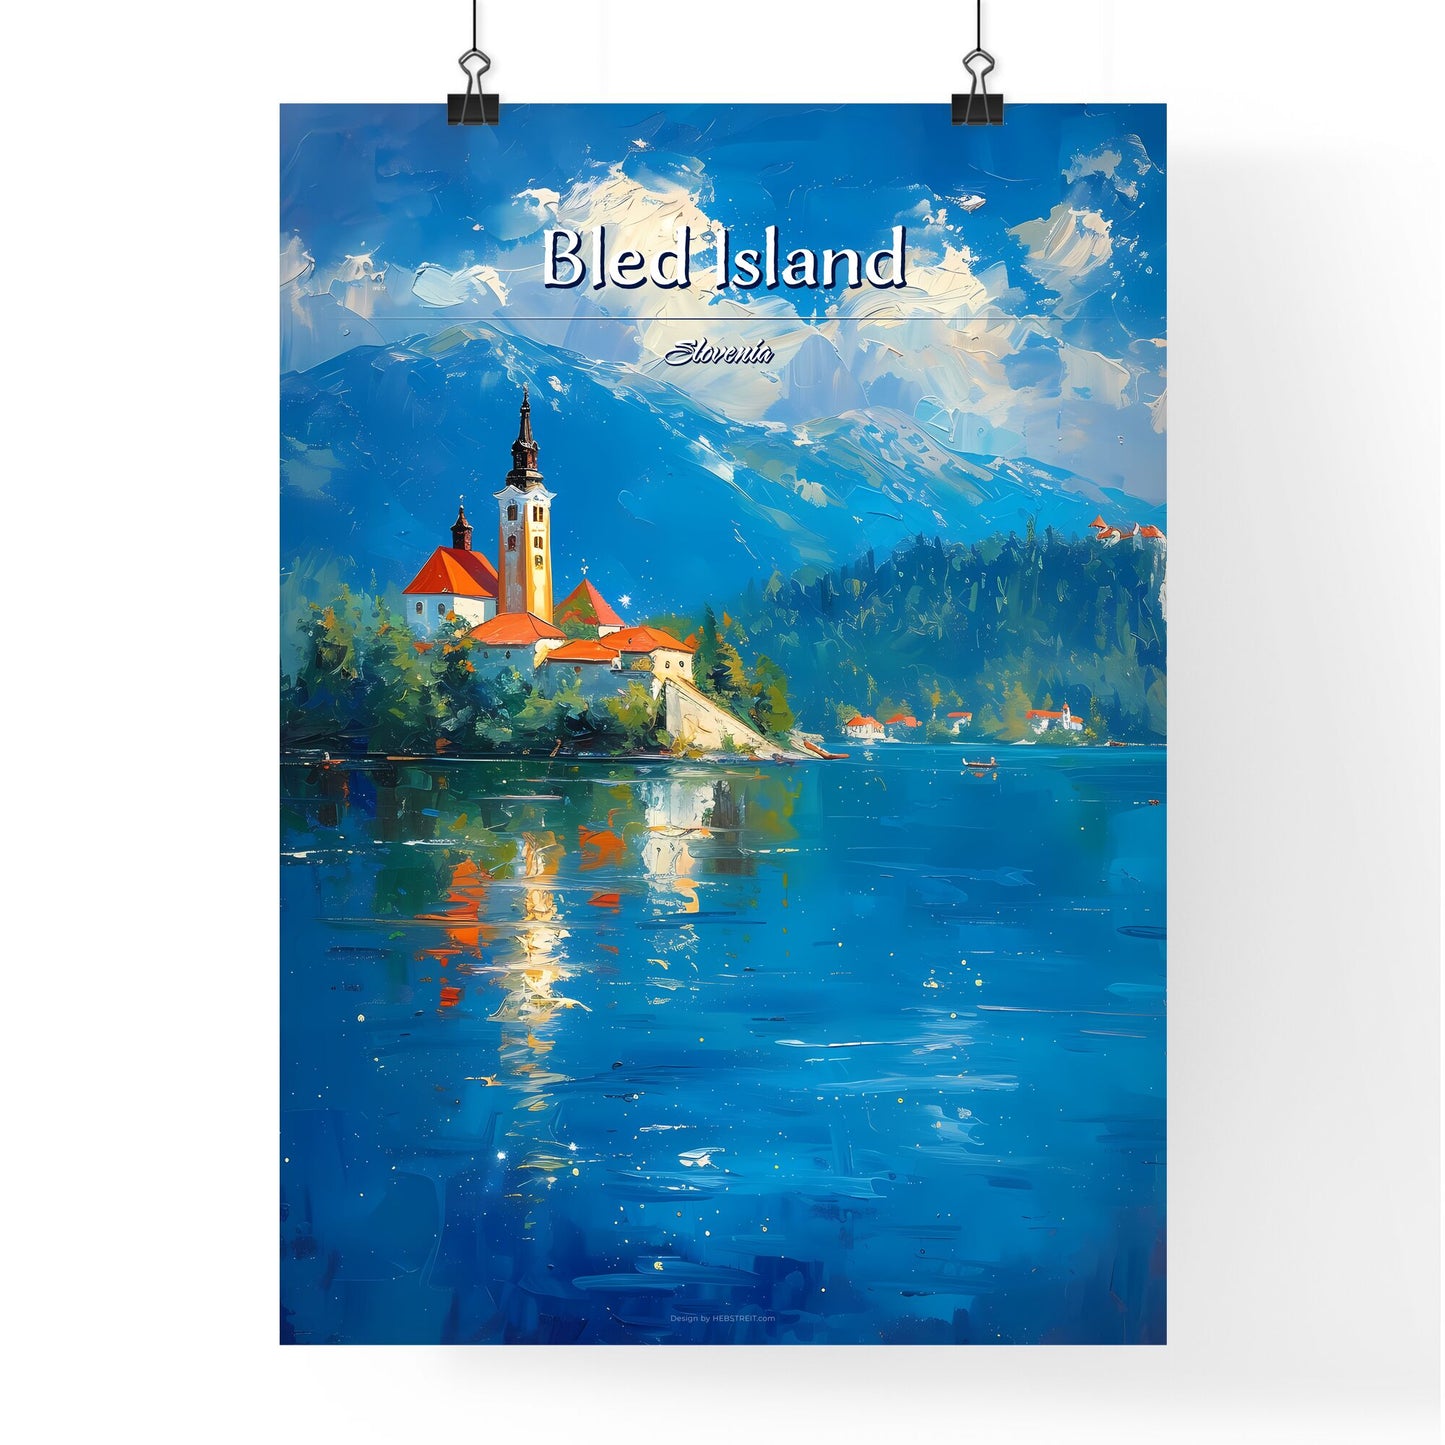 Bled Island, Slovenia - Art print of a painting of a building on an island in a lake Default Title